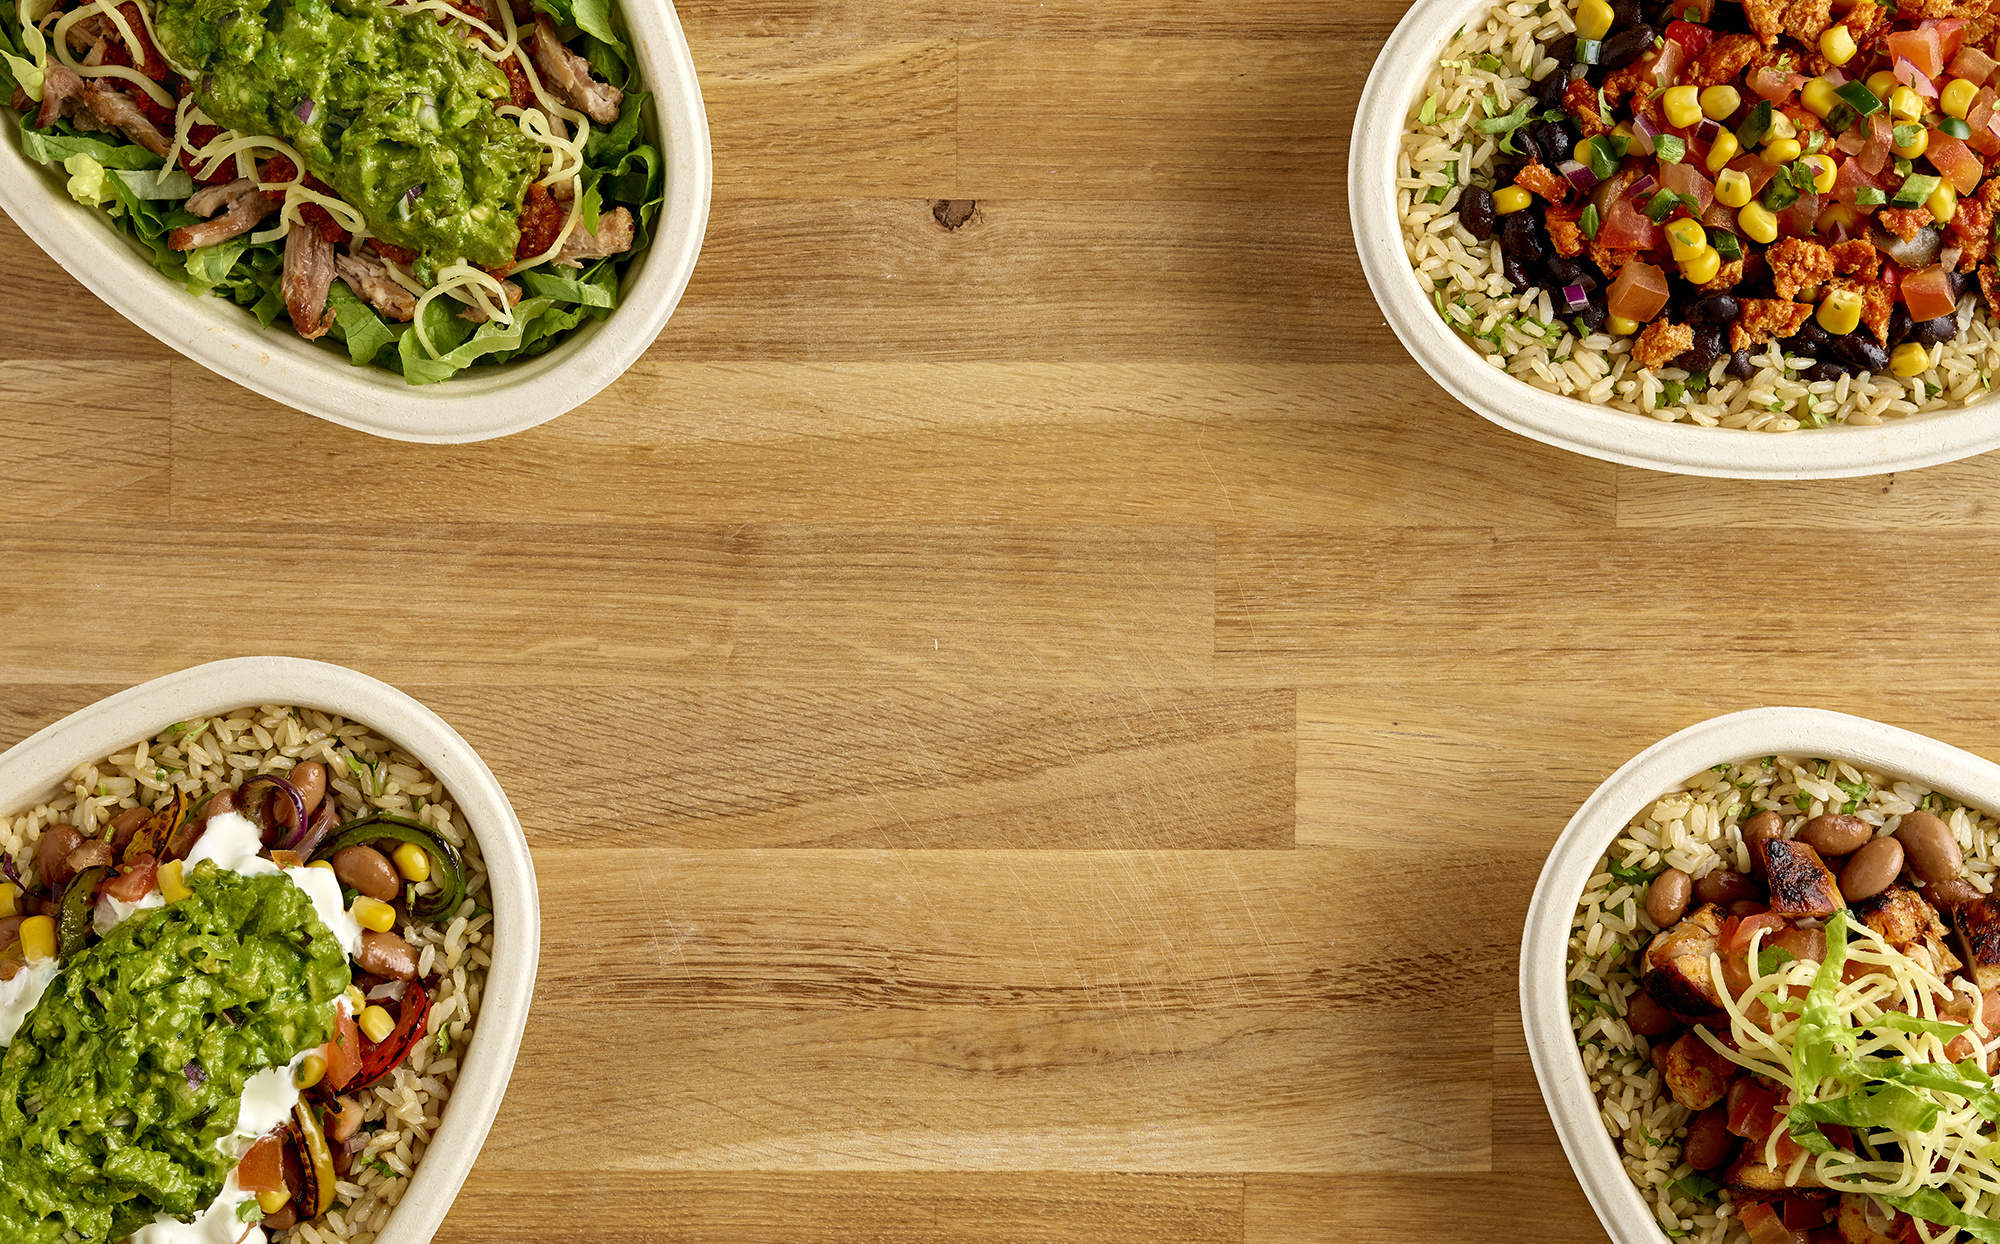 Chipotle: Chipotle's tacos, burritos, salads, Mexican flavor, Organic, Responsibly raised meat. 2000x1250 HD Wallpaper.